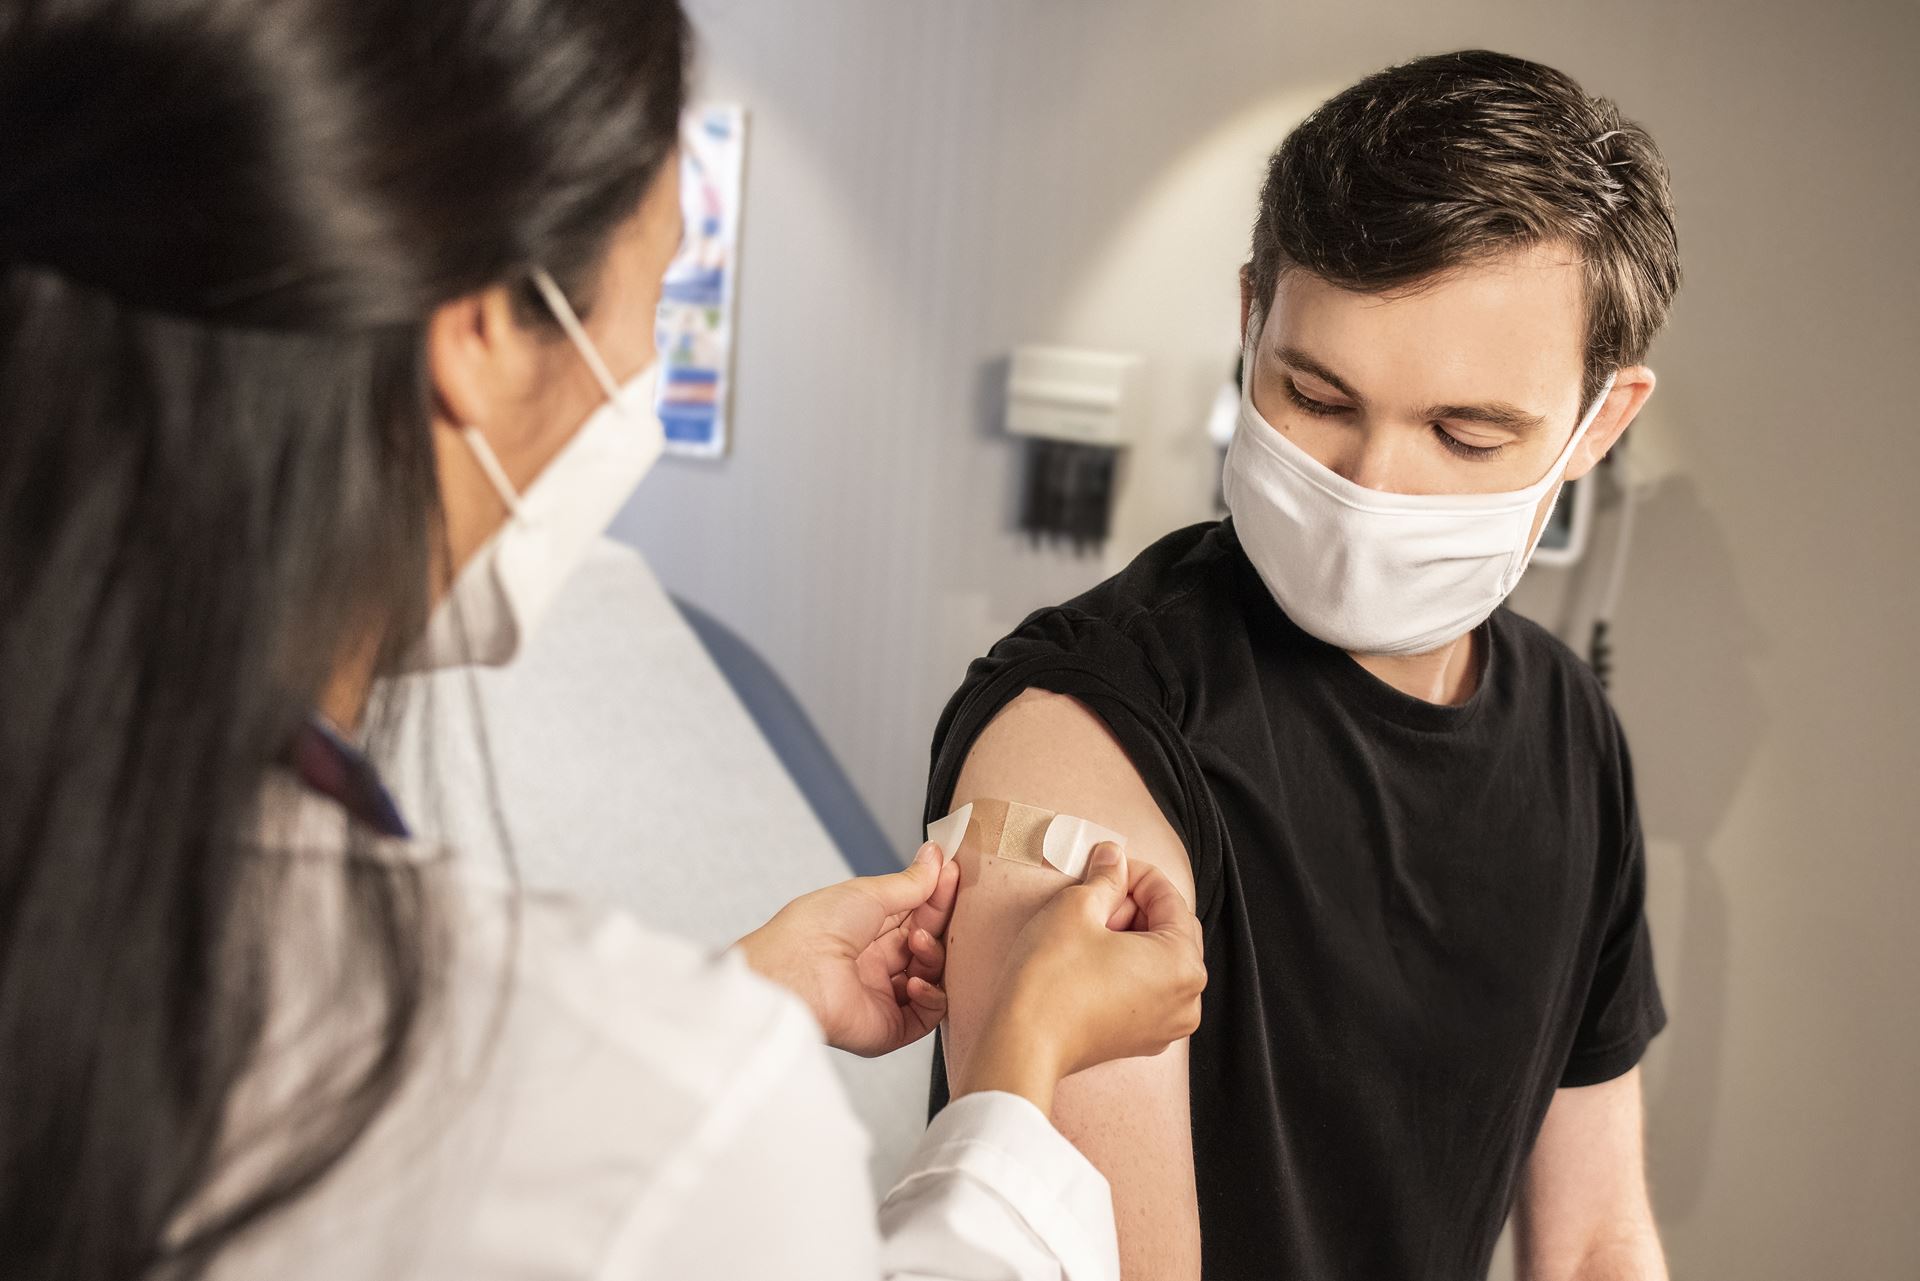 A healthcare professional administering a flu vaccination into a patient's upper arm